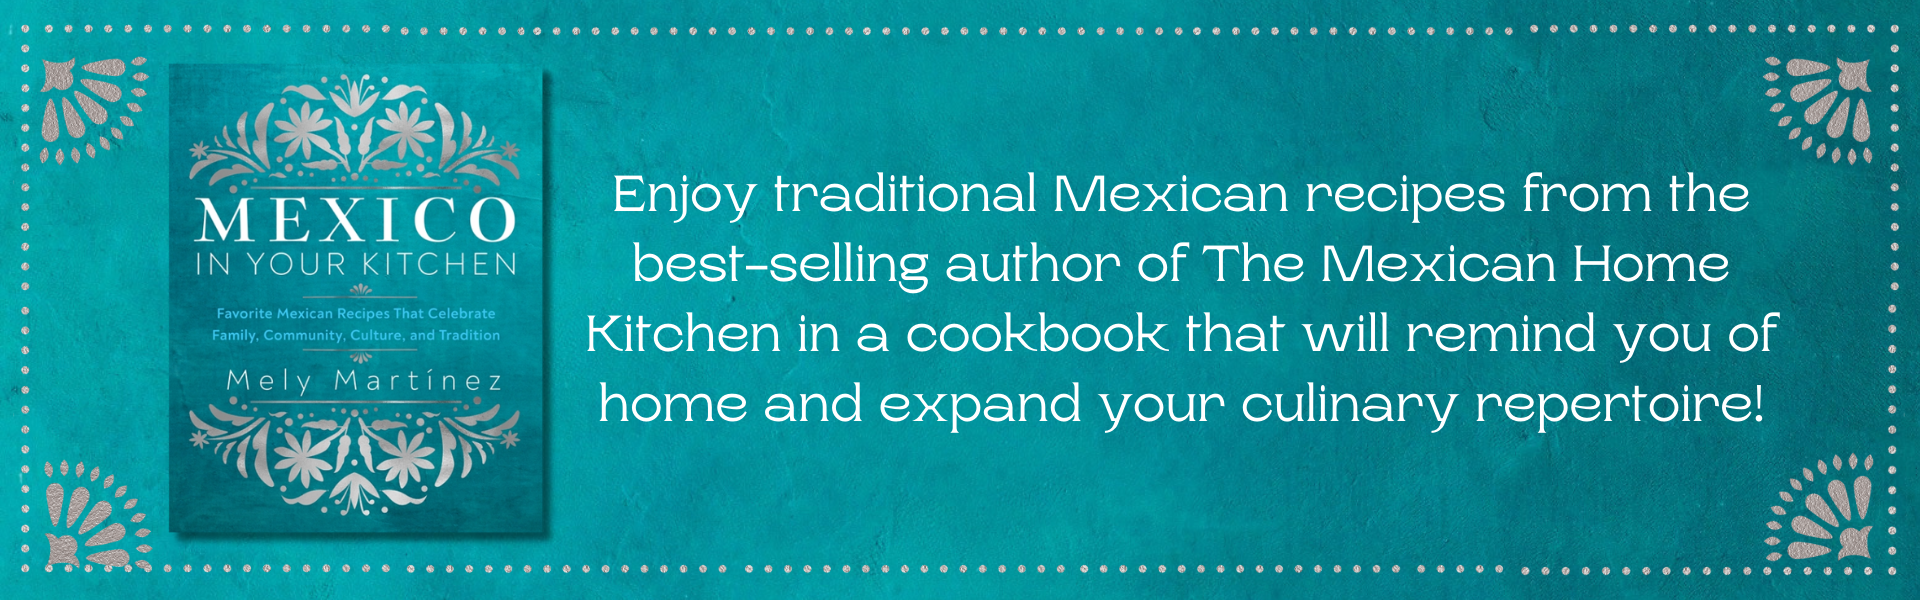 Mexico-in-Your-Kitchen-banner